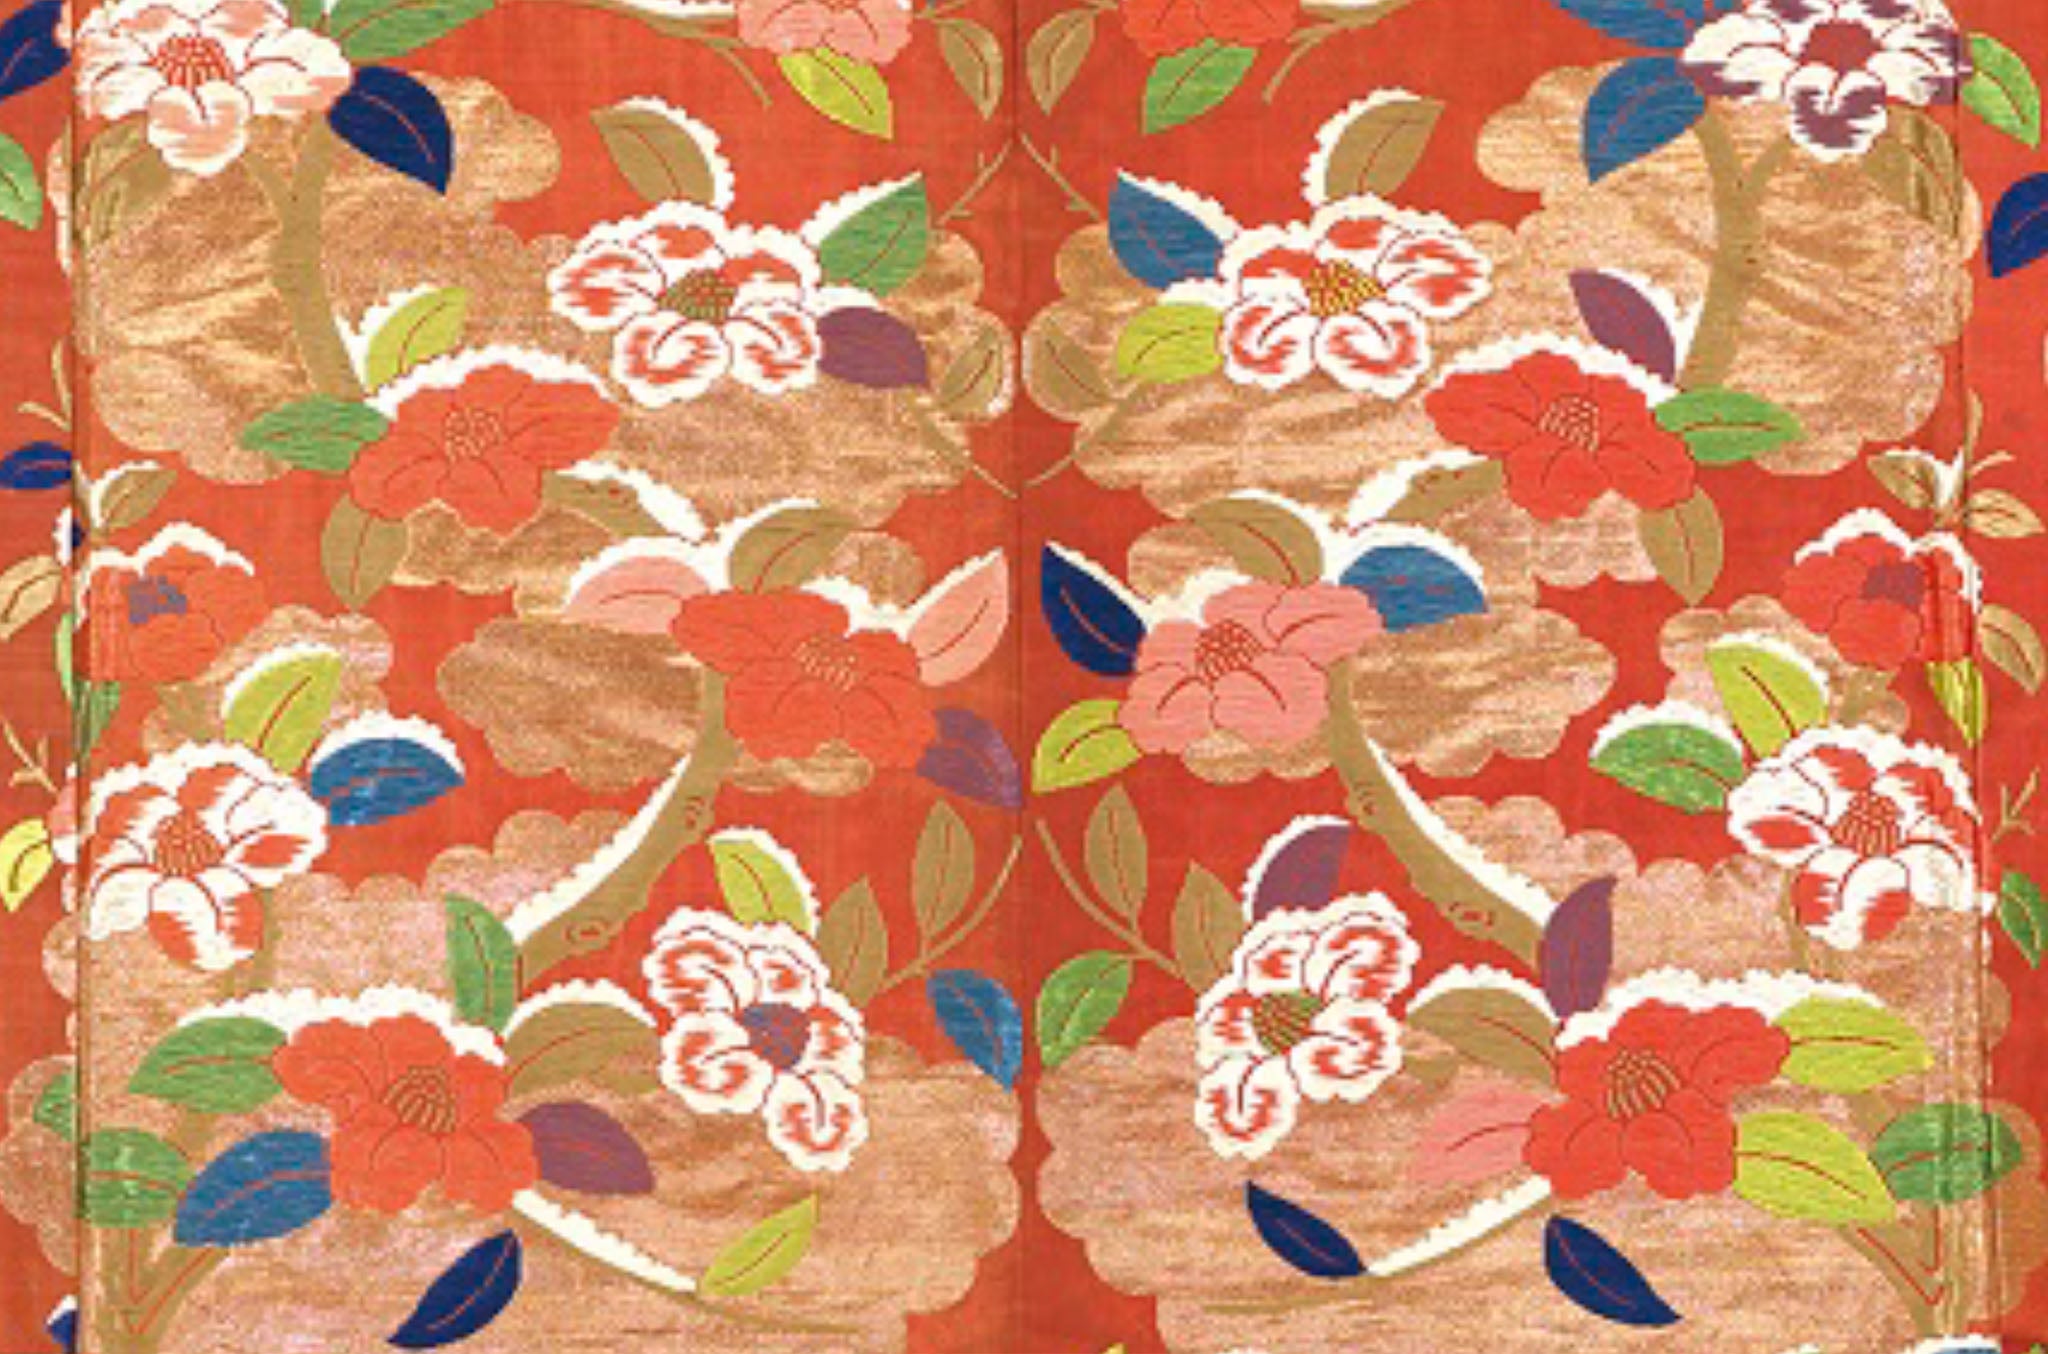 Detail of Noh Kimono from the Hatakeyama Collection at Kyoto National Museum